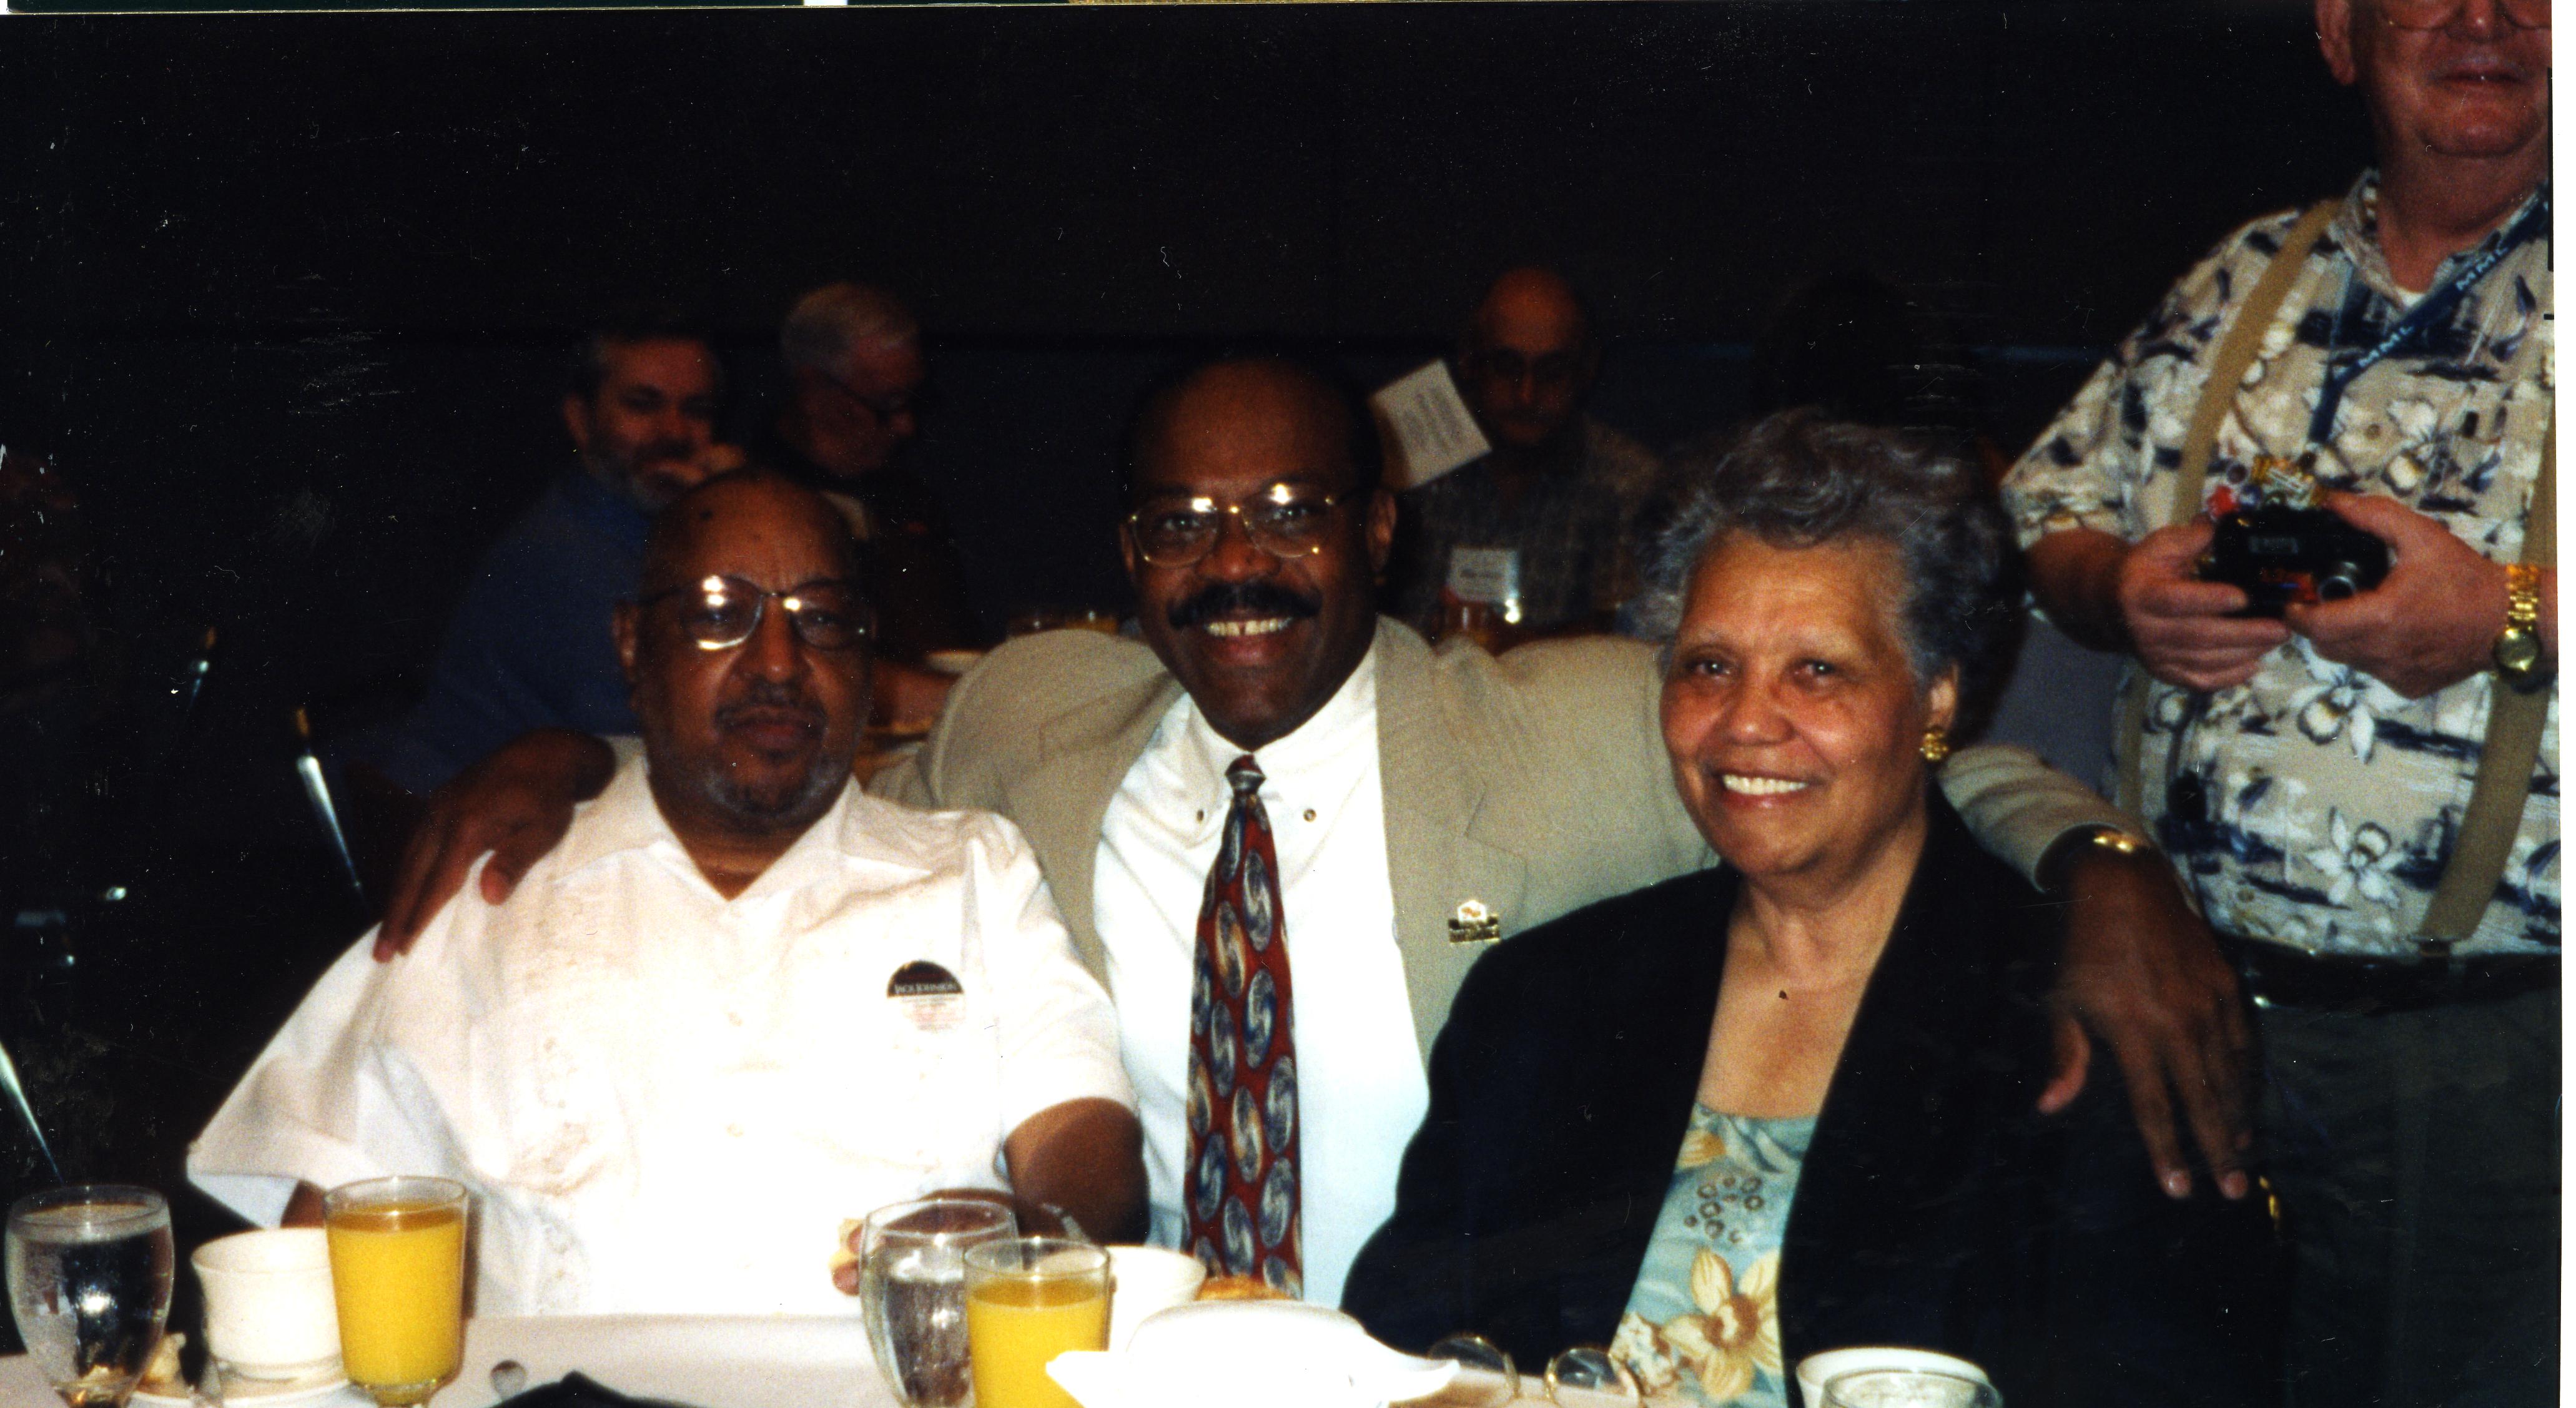 Mr. and Mrs. Lomax at event with Wayne Curry